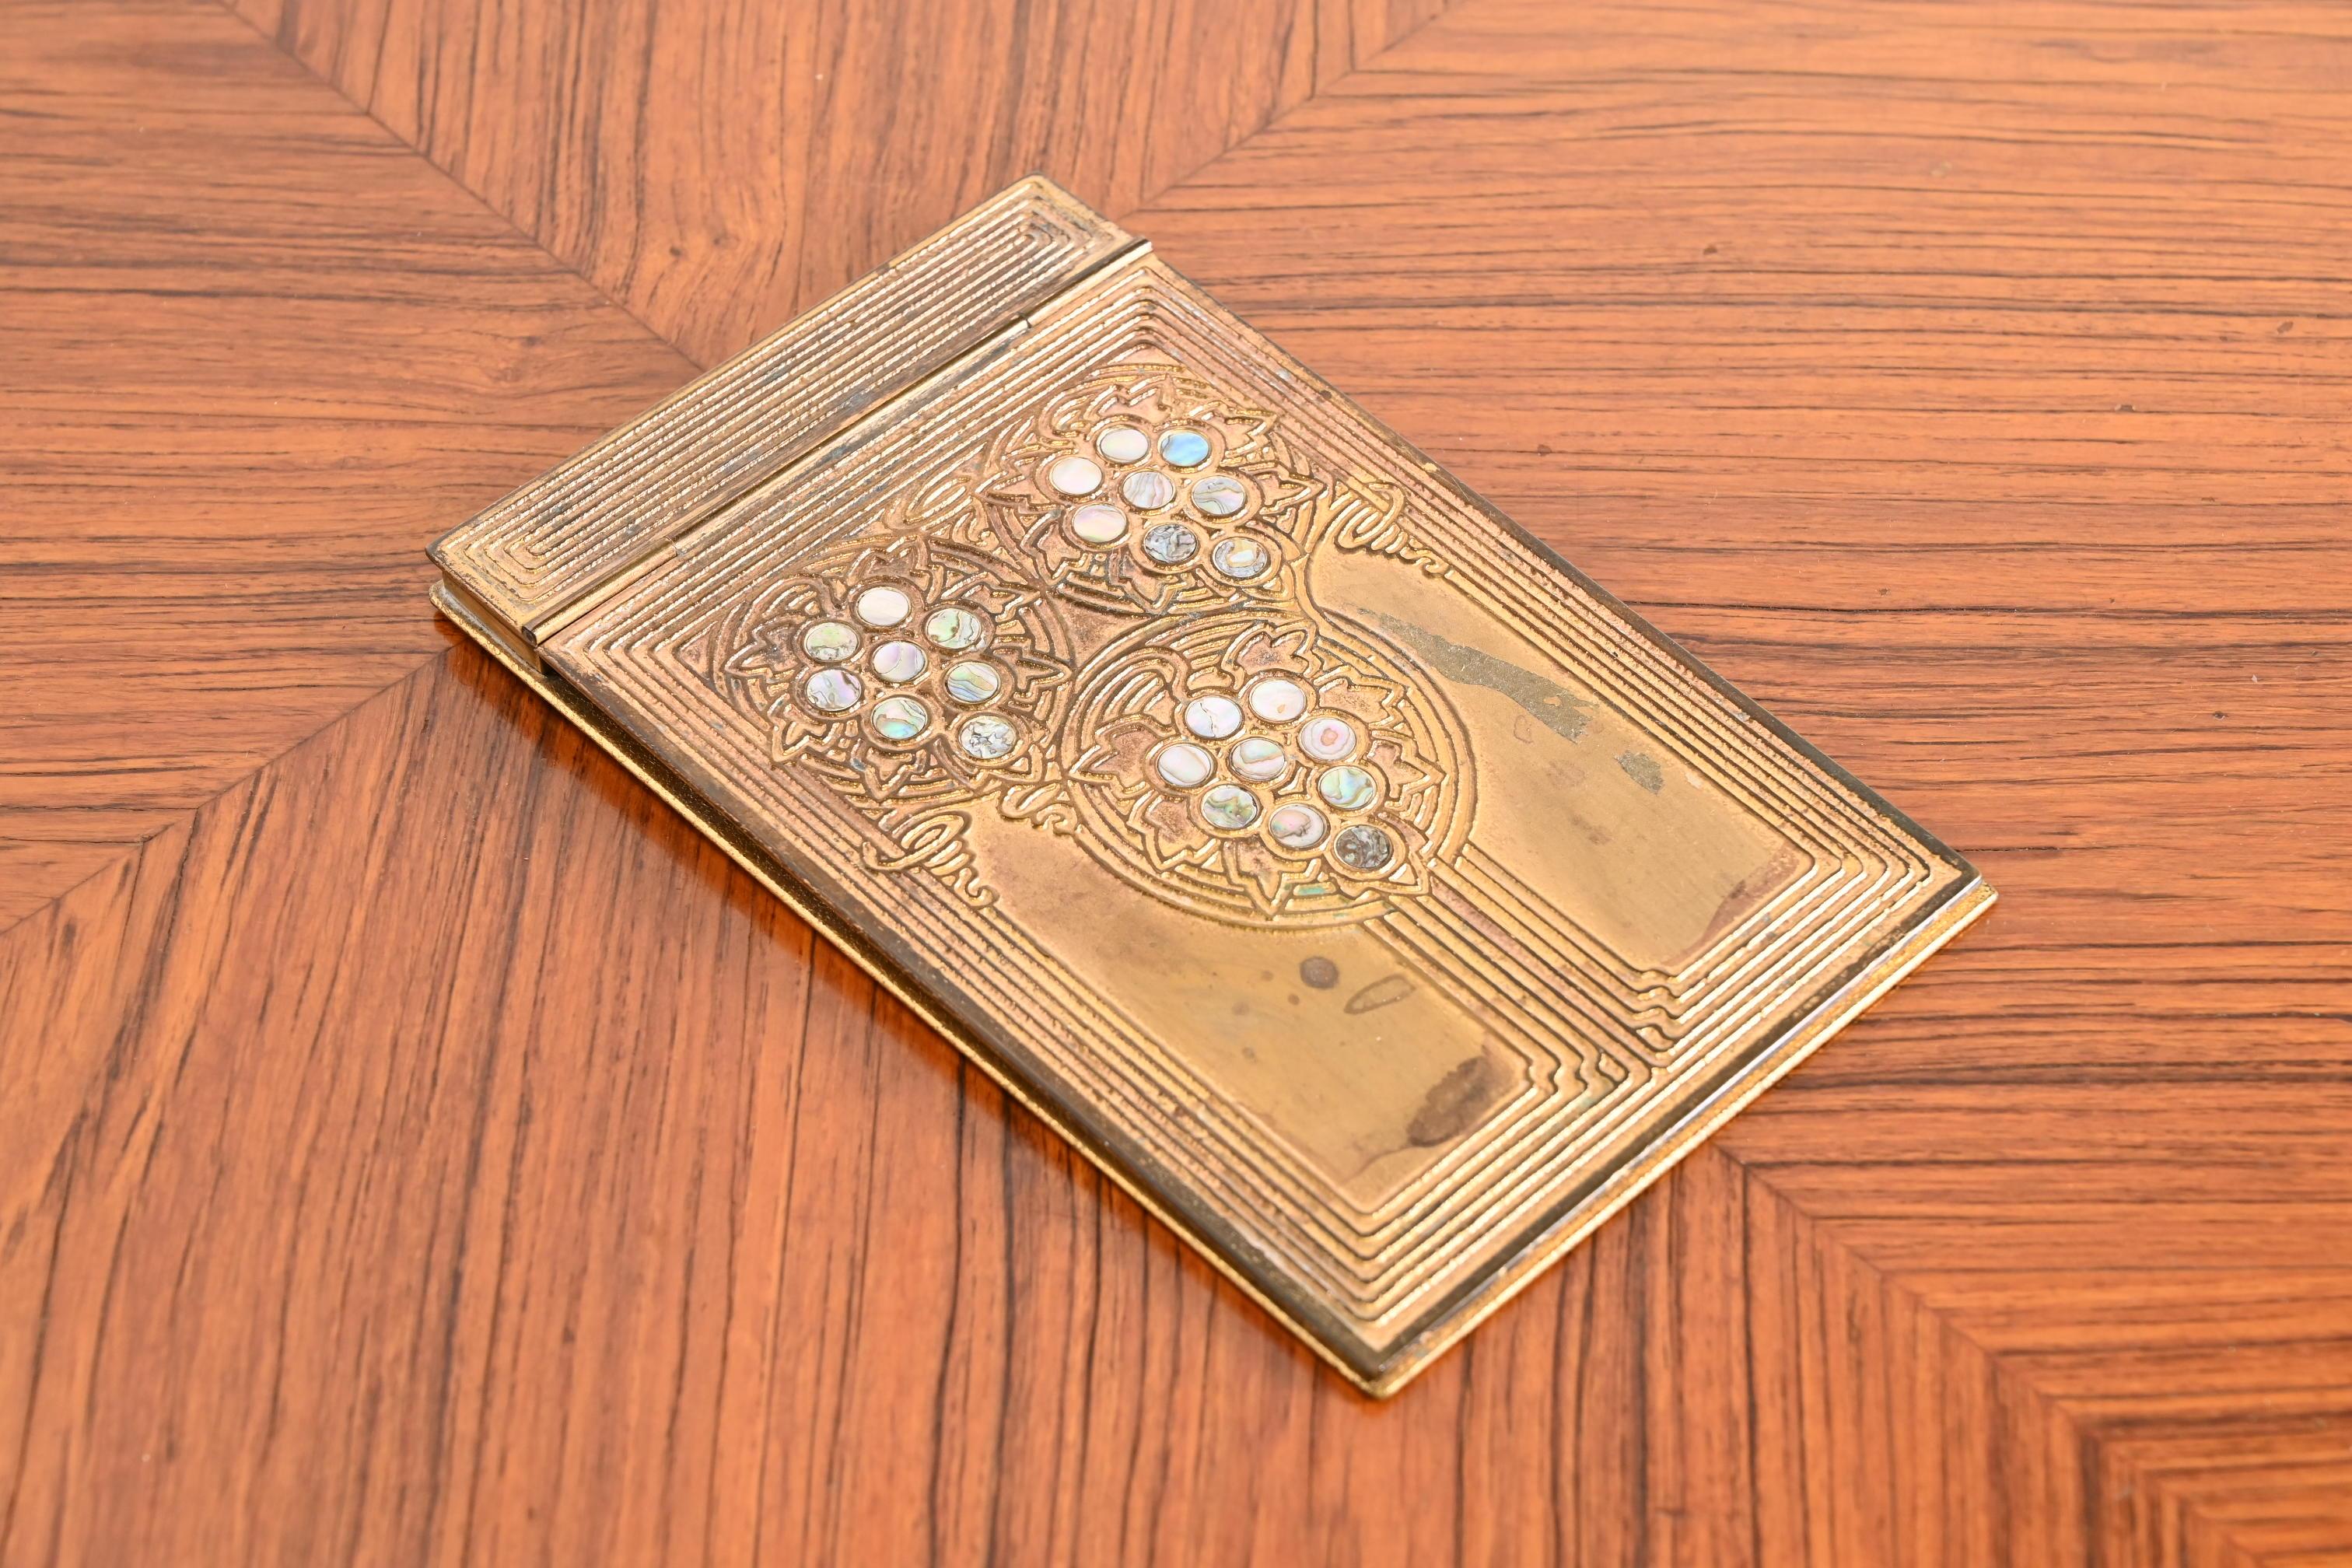 Tiffany Studios New York Art Deco Bronze Doré and Inlaid Abalone Notepad Holder In Good Condition For Sale In South Bend, IN